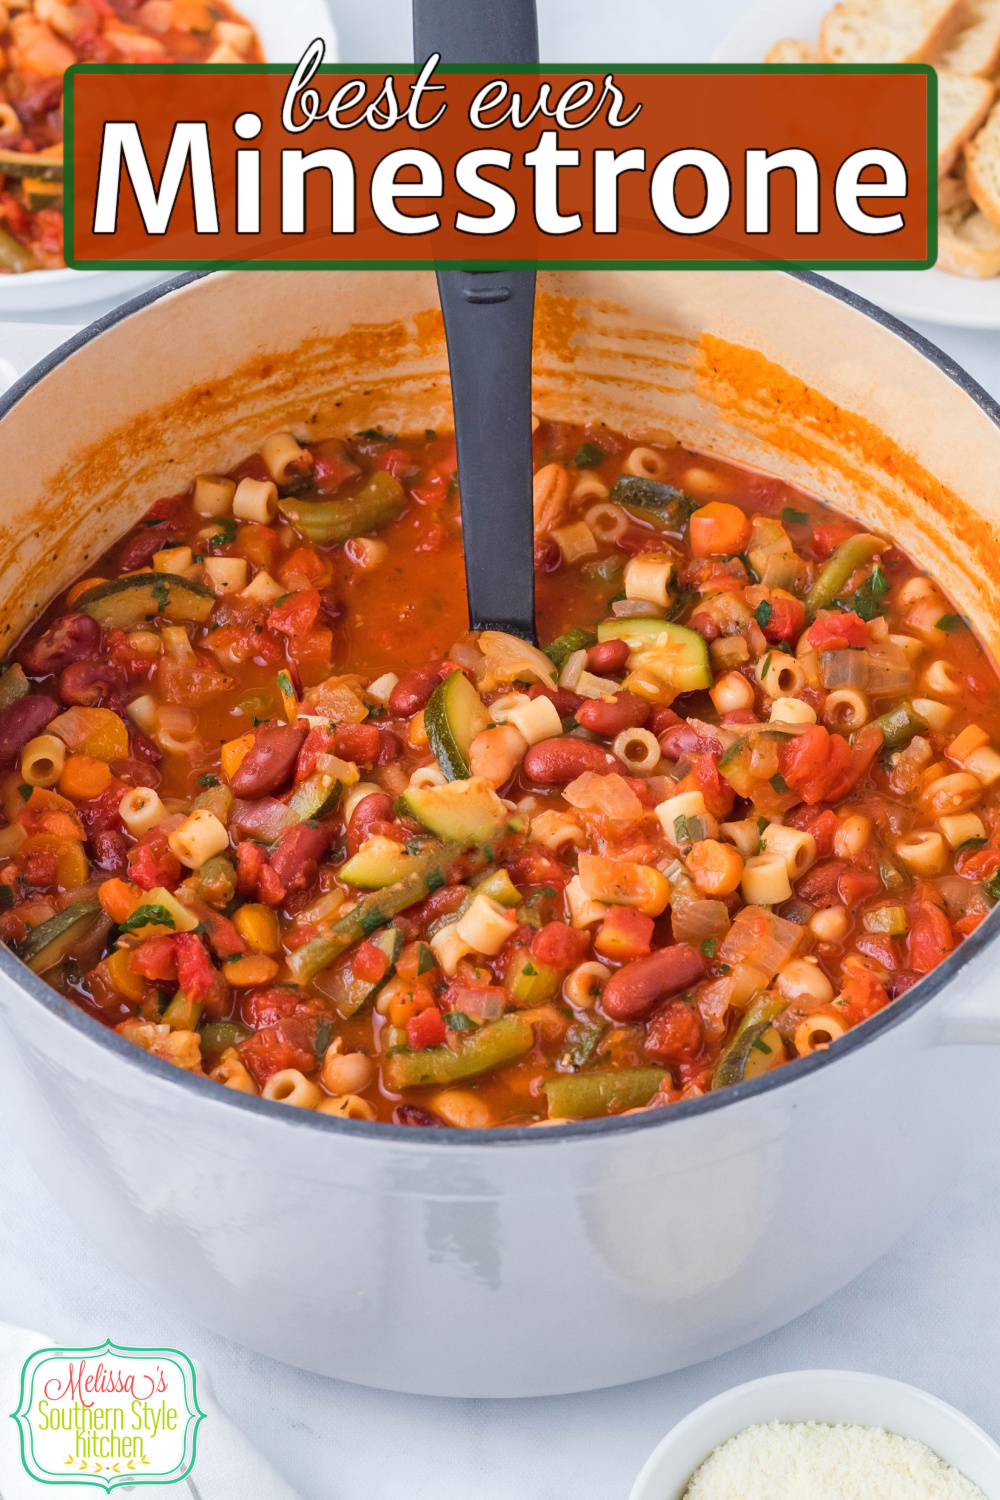 This Homemade Minestrone Recipe is packed with vibrant colors and fresh flavors making this one pot meal a winner any day of the week #minestronerecipe #easyminestrone #soup #souprecipes #meatlesssouprecipes #bestminestrone #vegetablesoup #ditilinipasta via @melissasssk